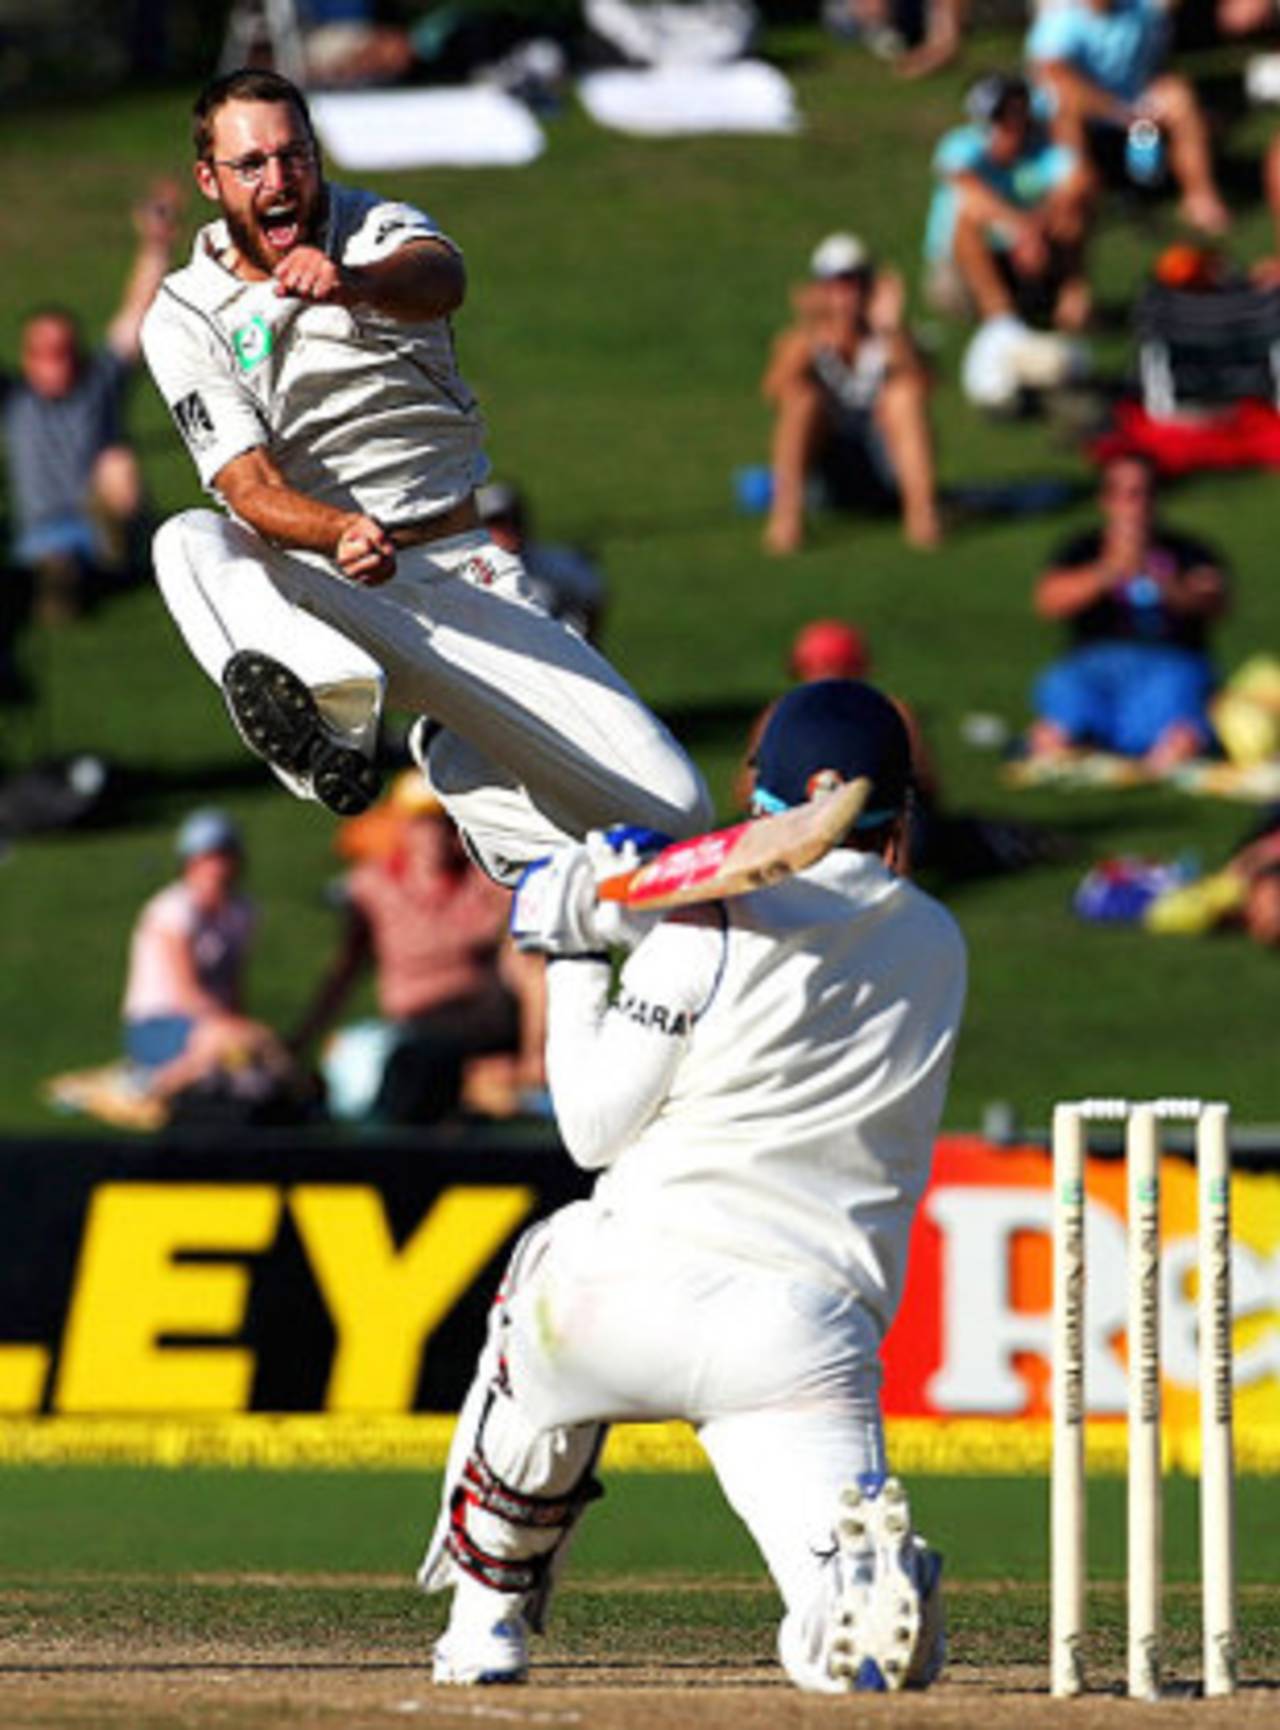 Daniel Vettori is airborne after getting Virender Sehwag to nick one, New Zealand v India, 2nd Test, Napier, 2nd day, March 27, 2009